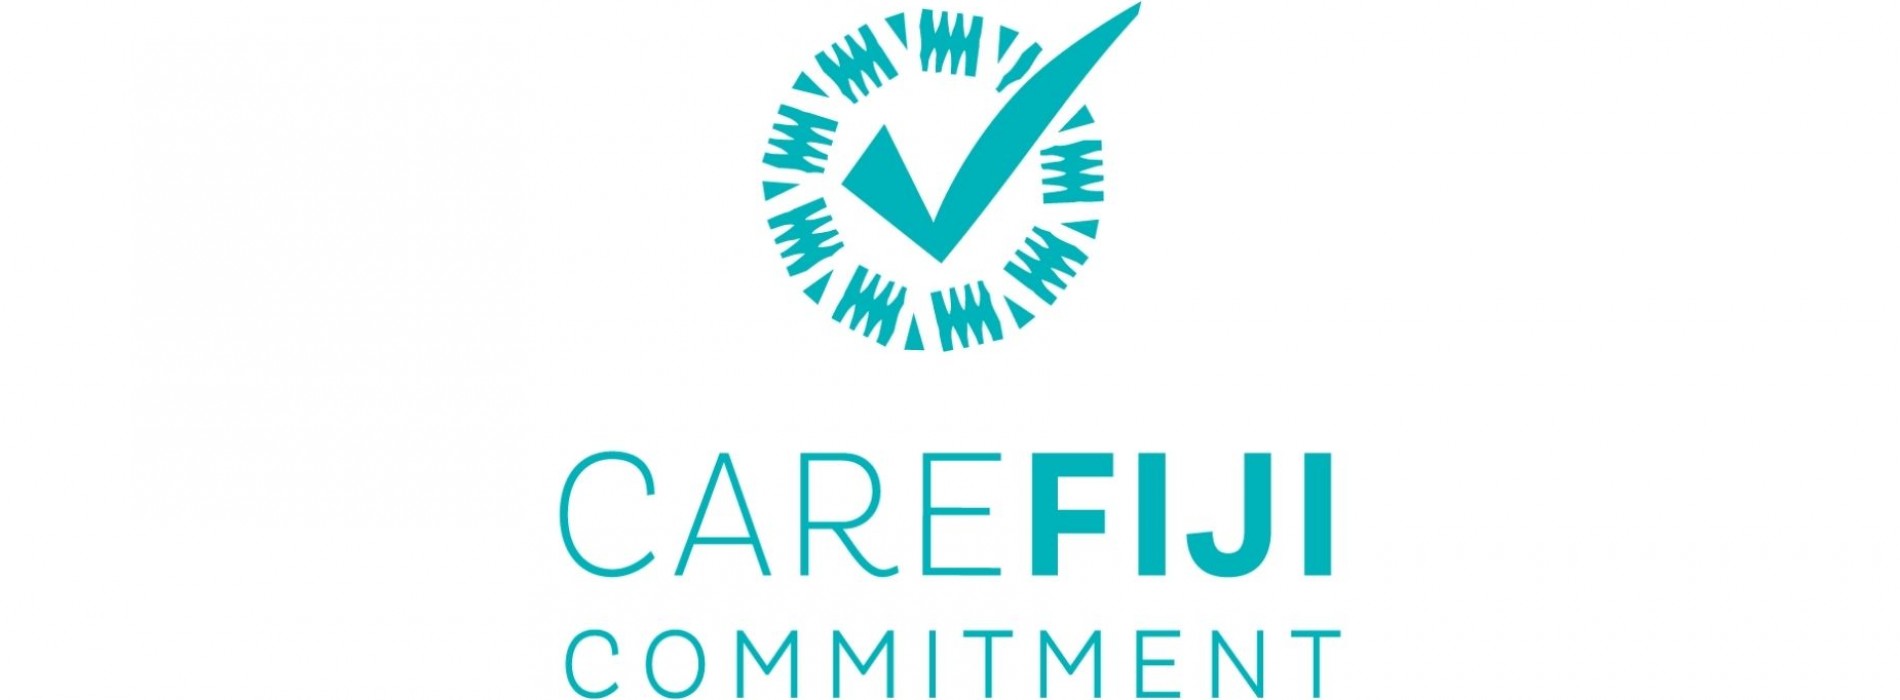 Fiji Introduces ‘Care Fiji Commitment’ Program for Traveler Safety post-reopening  